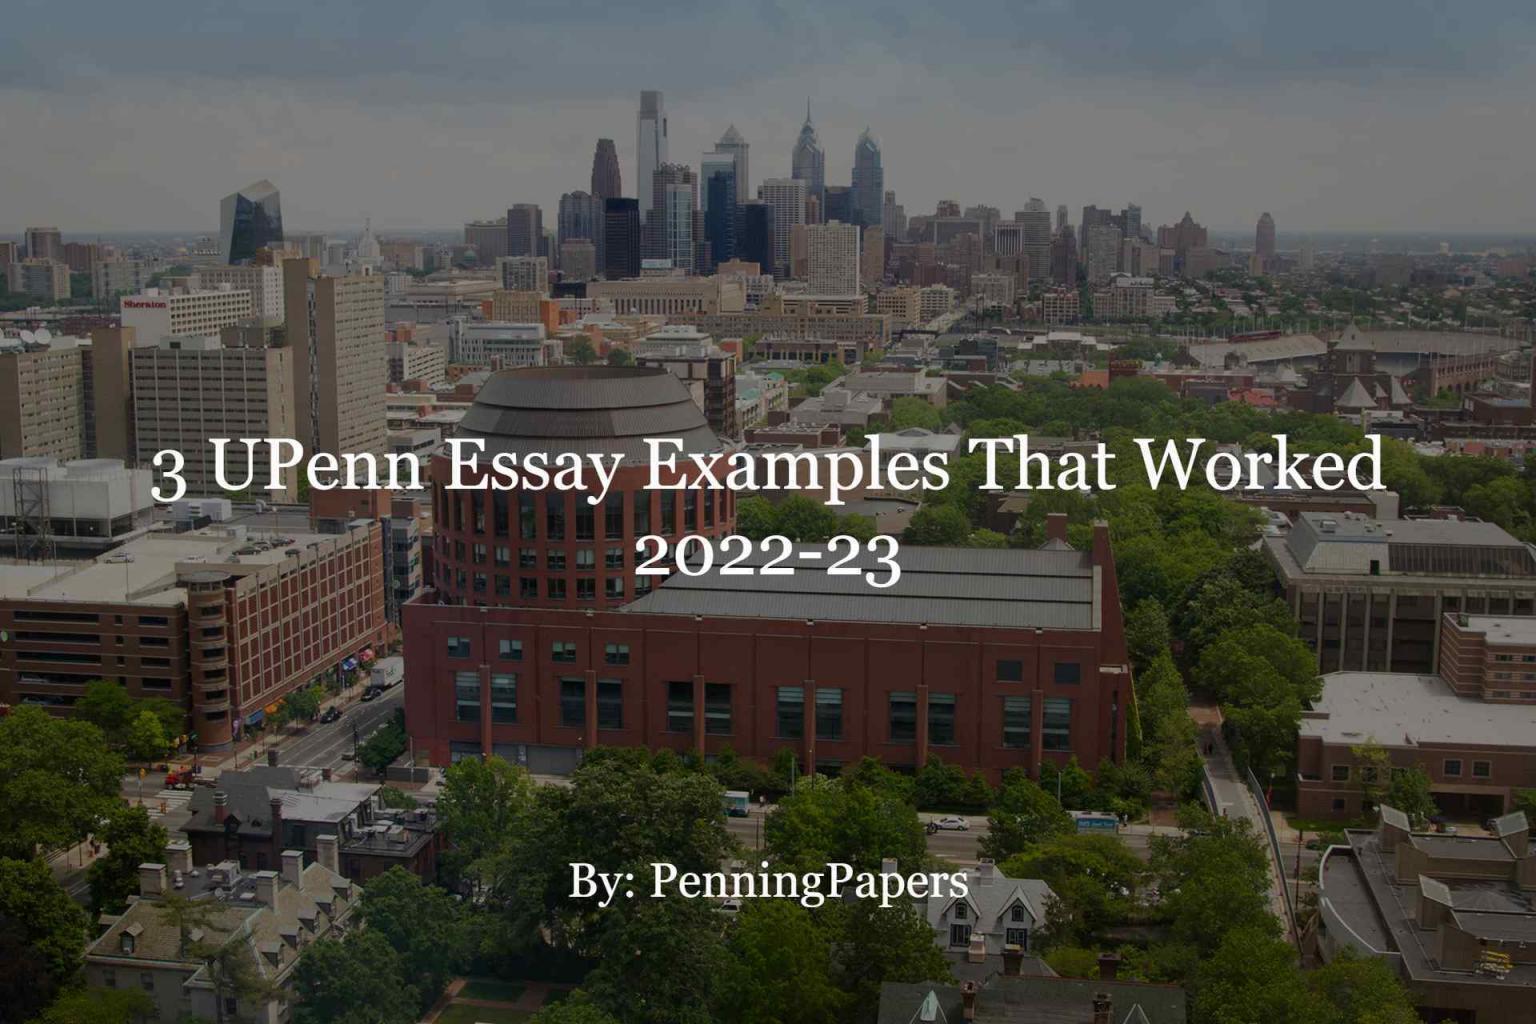 upenn essay prompts examples